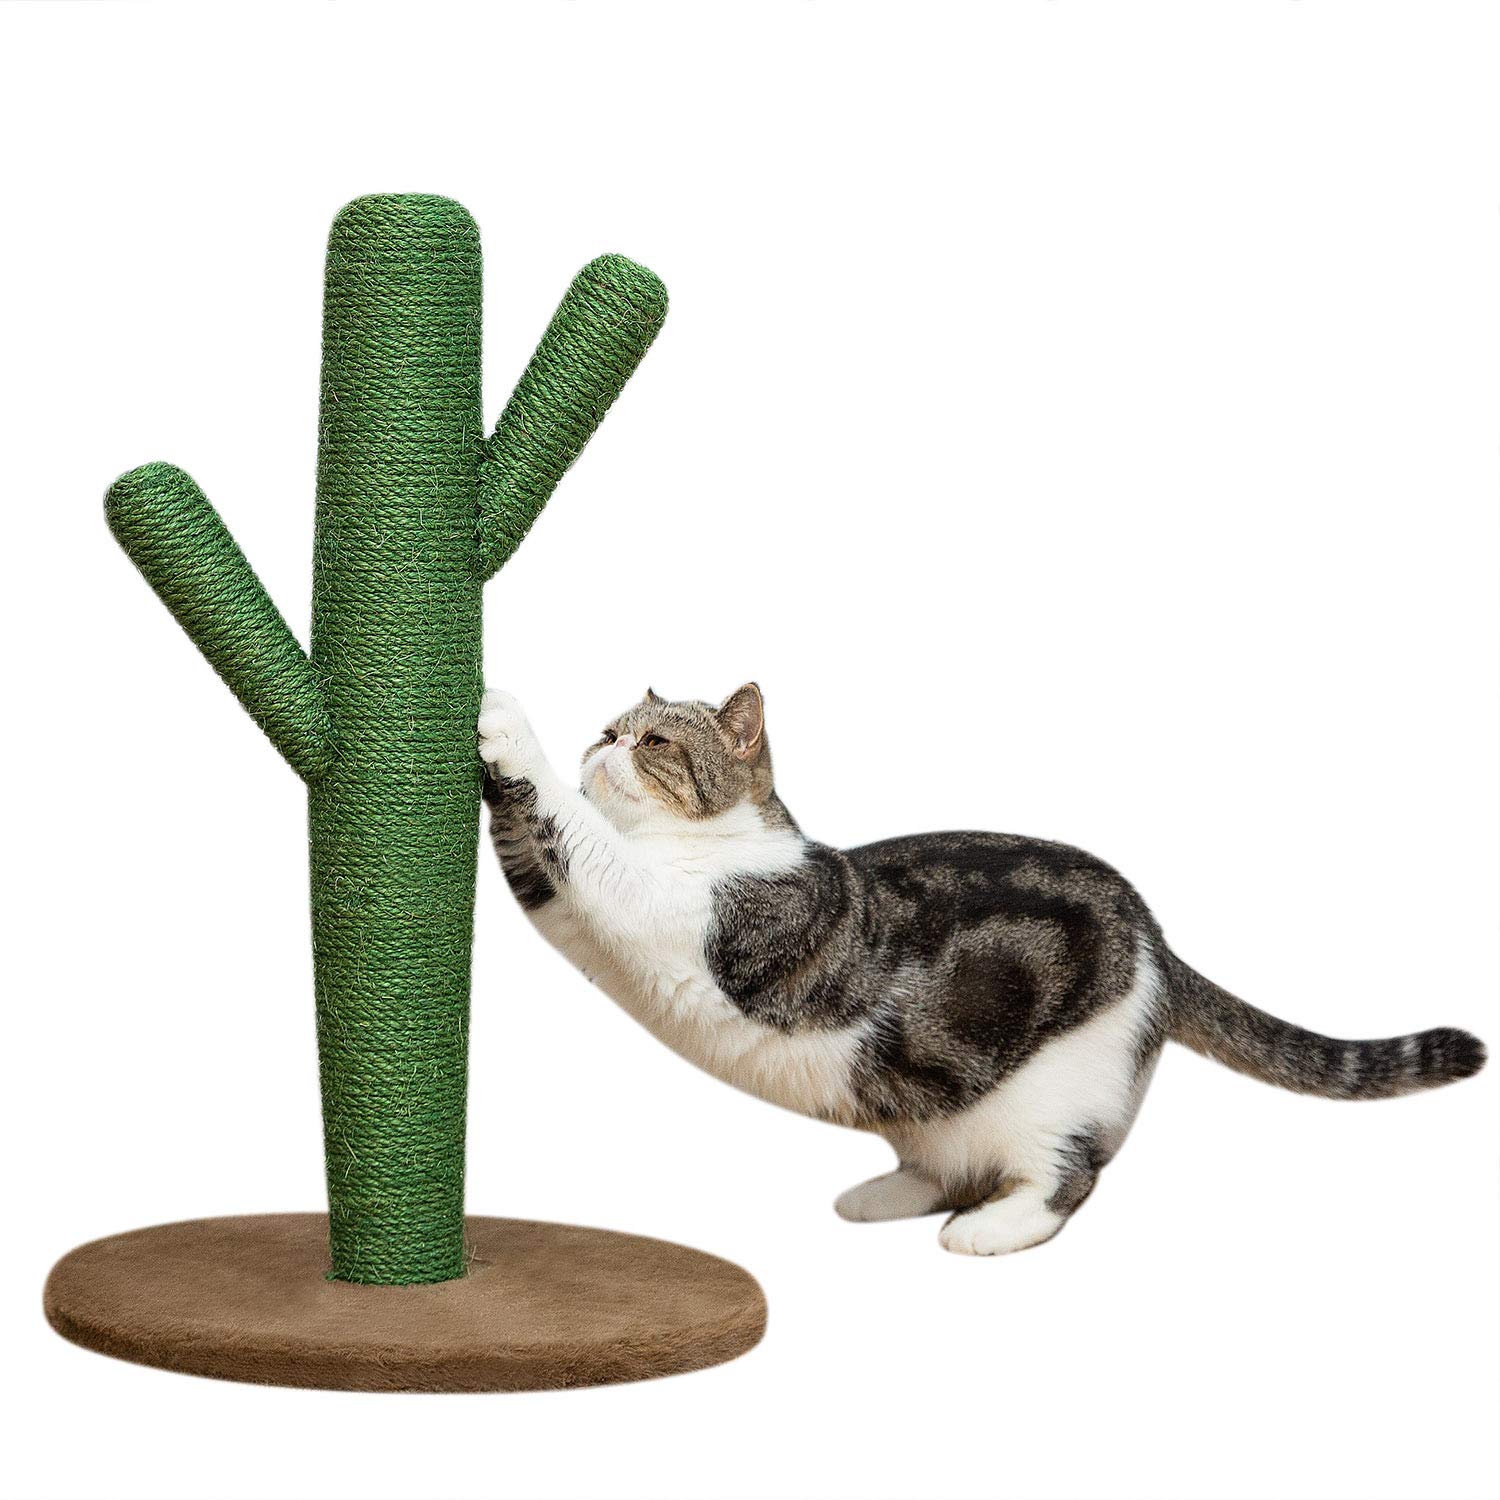 Yangbaga Cat Scratching Post, Cat Activity Tree with Catnip and Covered with Sisal Rope for Cat Scratching, 22.4in Cat Tower and Bed for Adult Cats